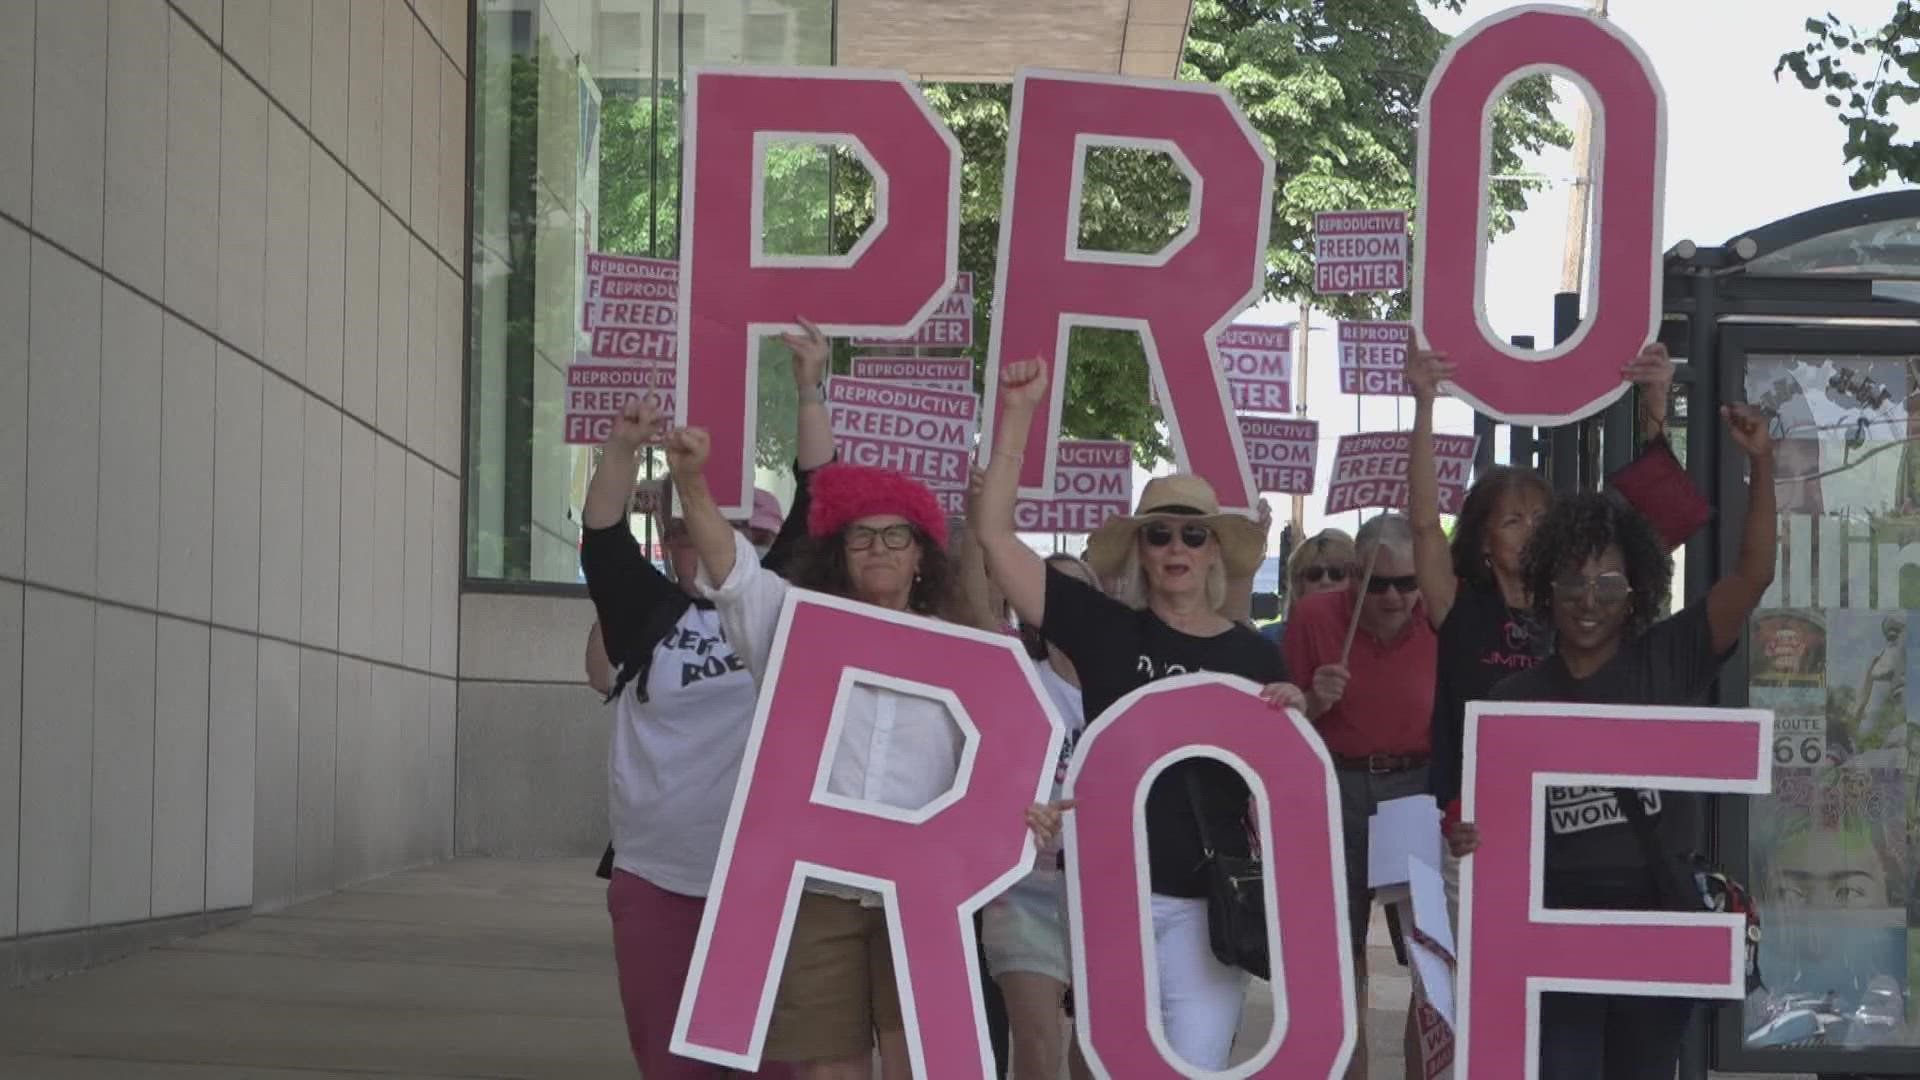 Anti-abortion activists celebrated, after nearly 50 years of fighting for change. Abortion rights advocates spent the day coping with a post-Roe world.